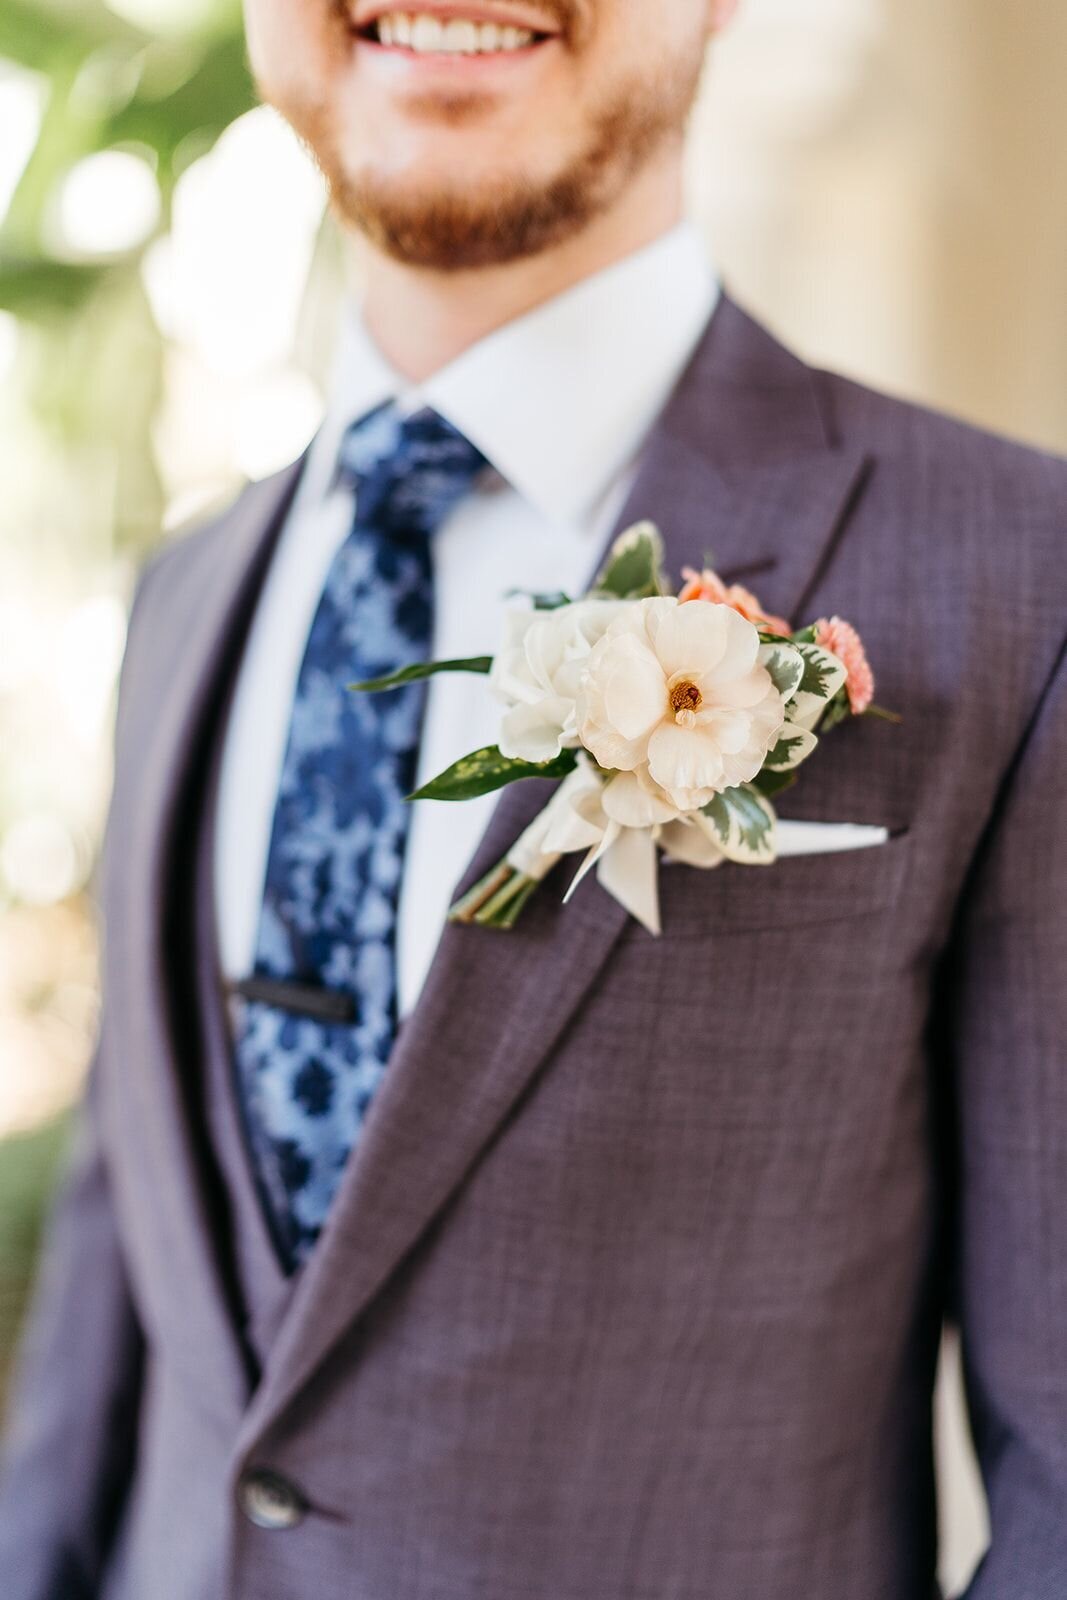 boutonnieres for a bold addition to the groom and groomsmen's suits.